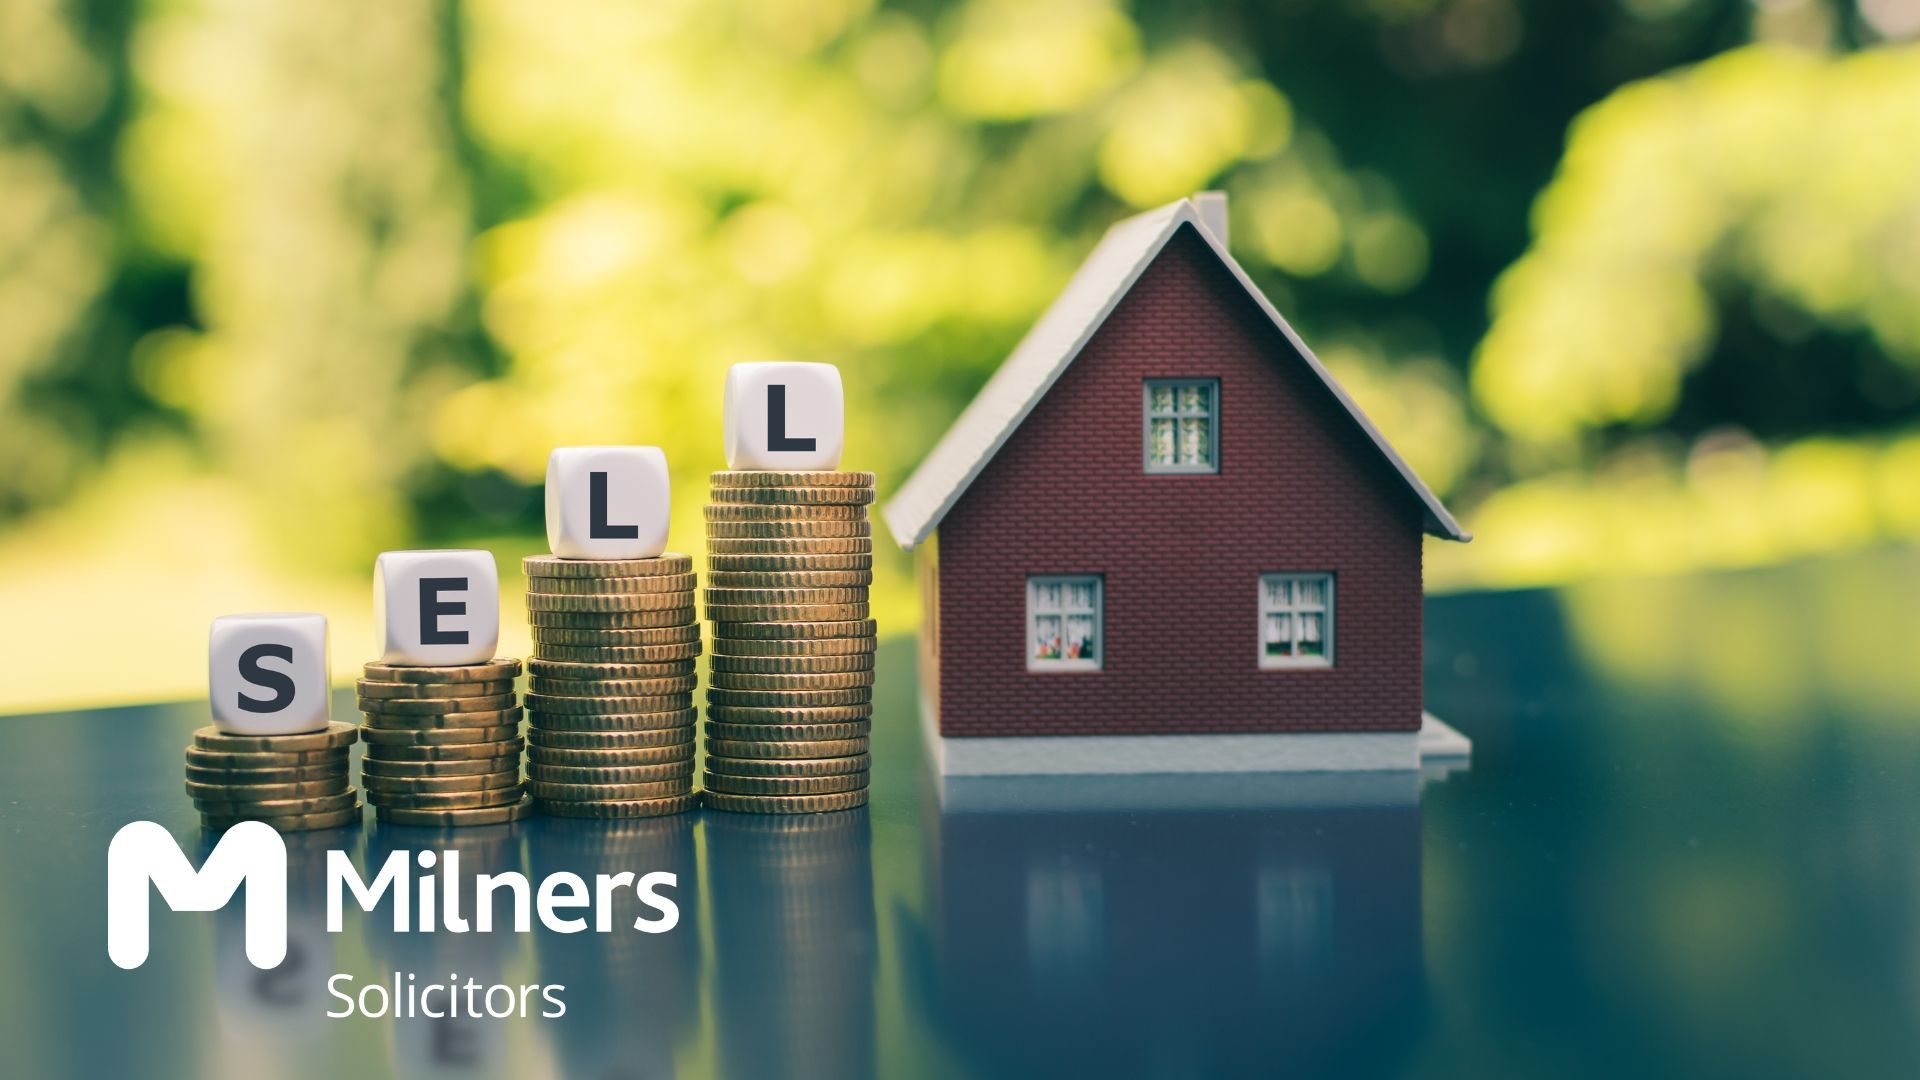 When selling a property, you have to prepare for extra costs from the estate agents, conveyancer and more. Discover the true cost of selling a house.